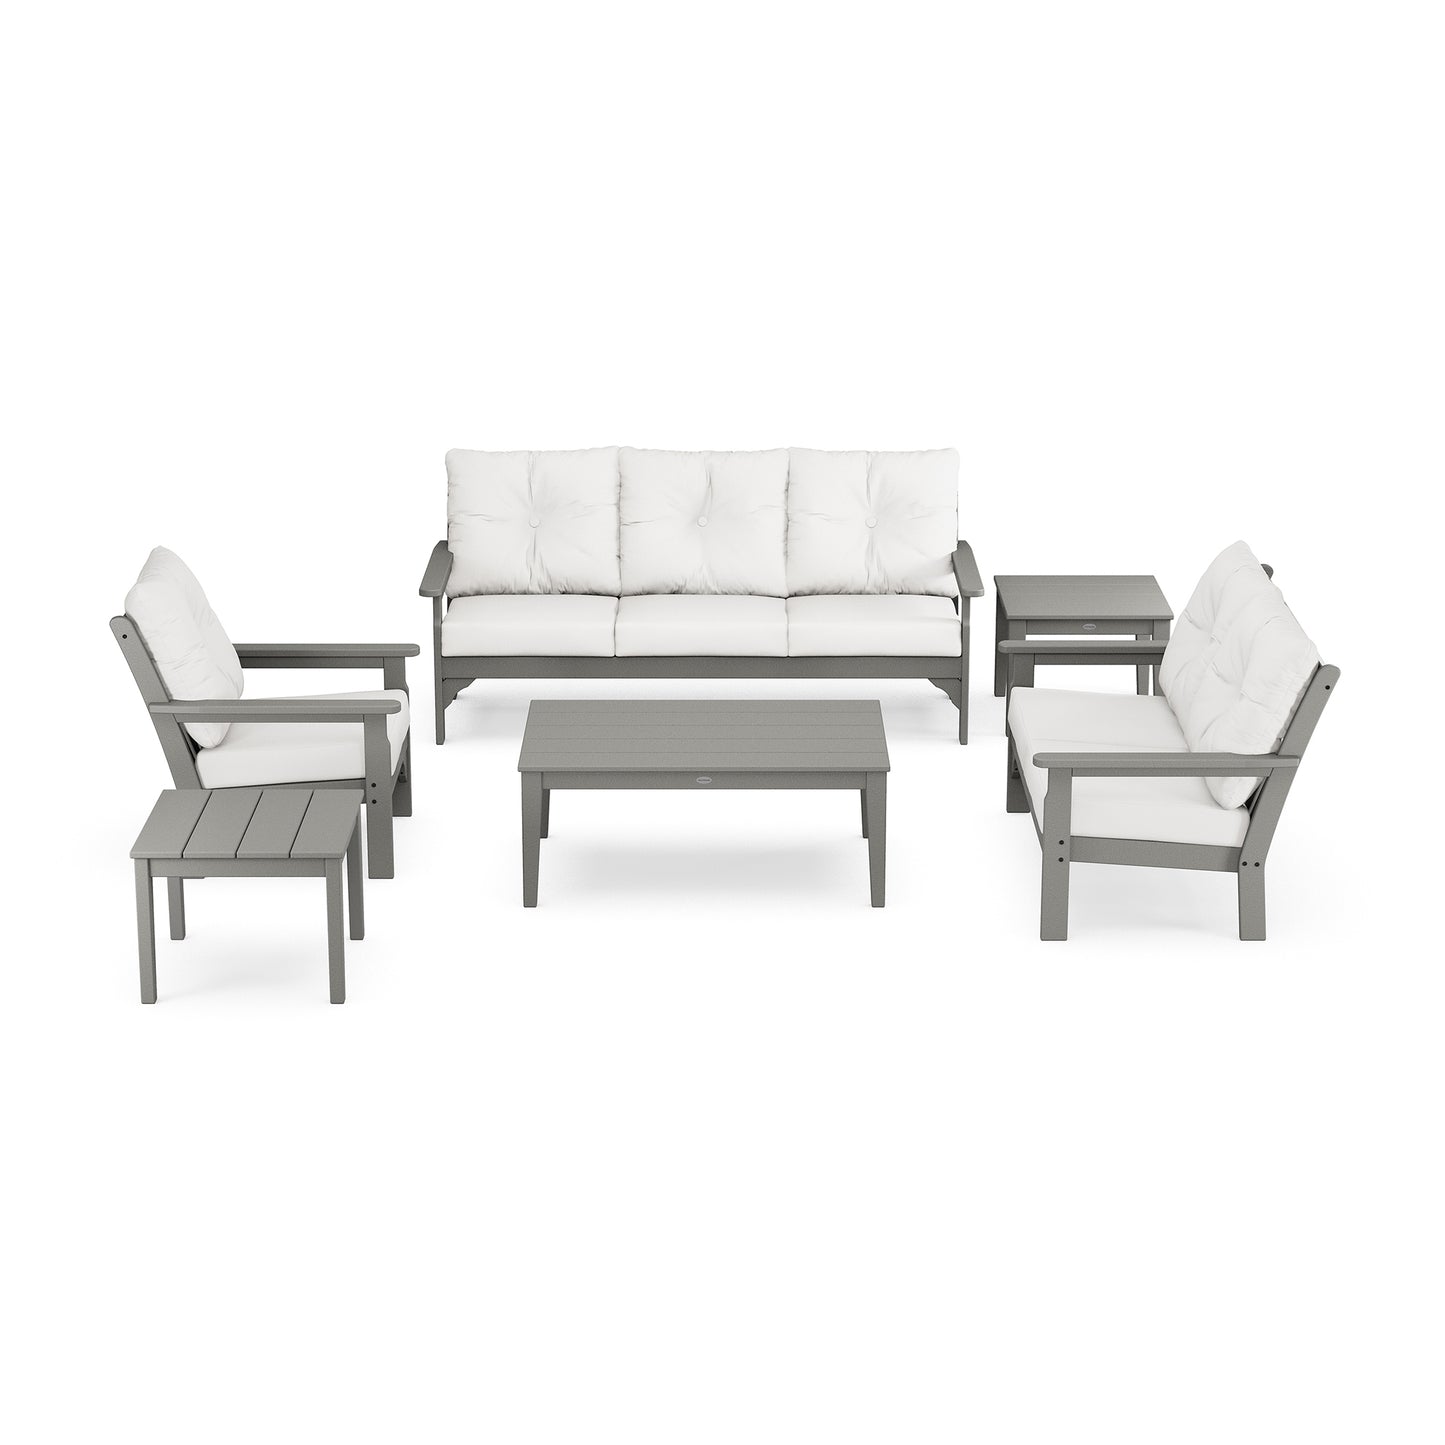 A modern POLYWOOD Vineyard 6-Piece Deep Seating Set on a white background, including a sofa with white cushions, two armchairs, a coffee table, and two side tables, all in matching gray.